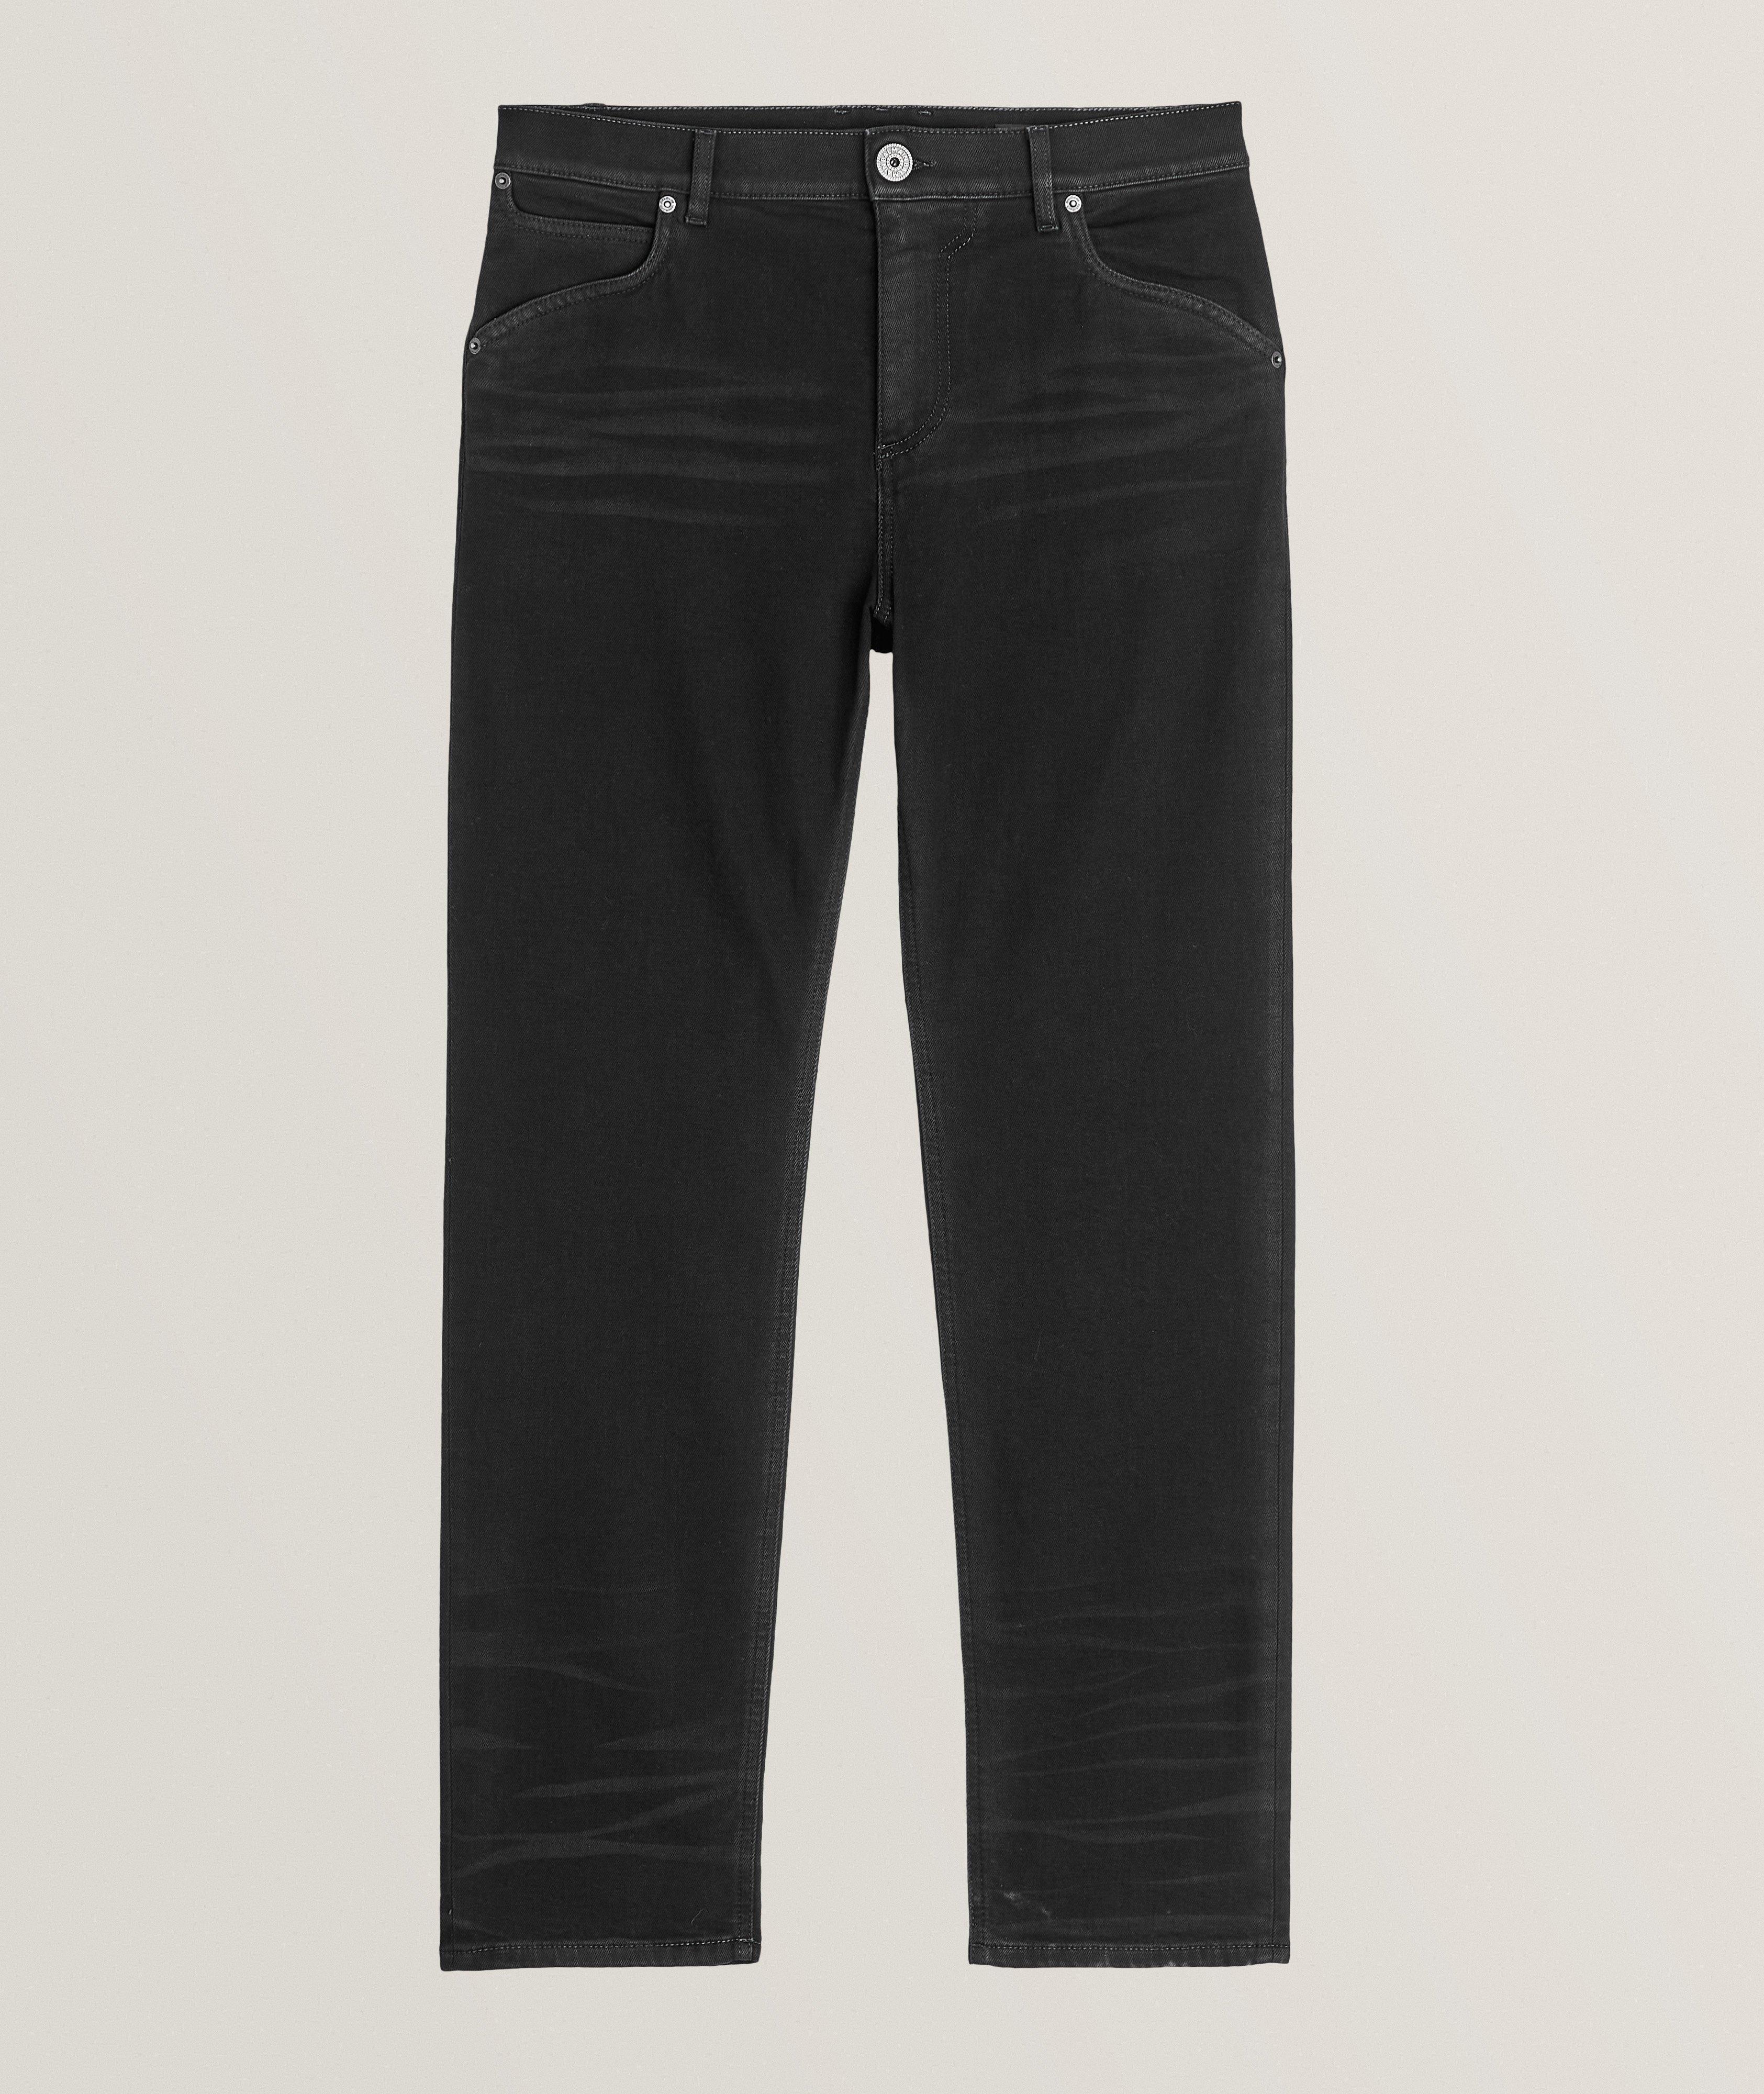 Balmain Washed Stretch-Cotton Jeans